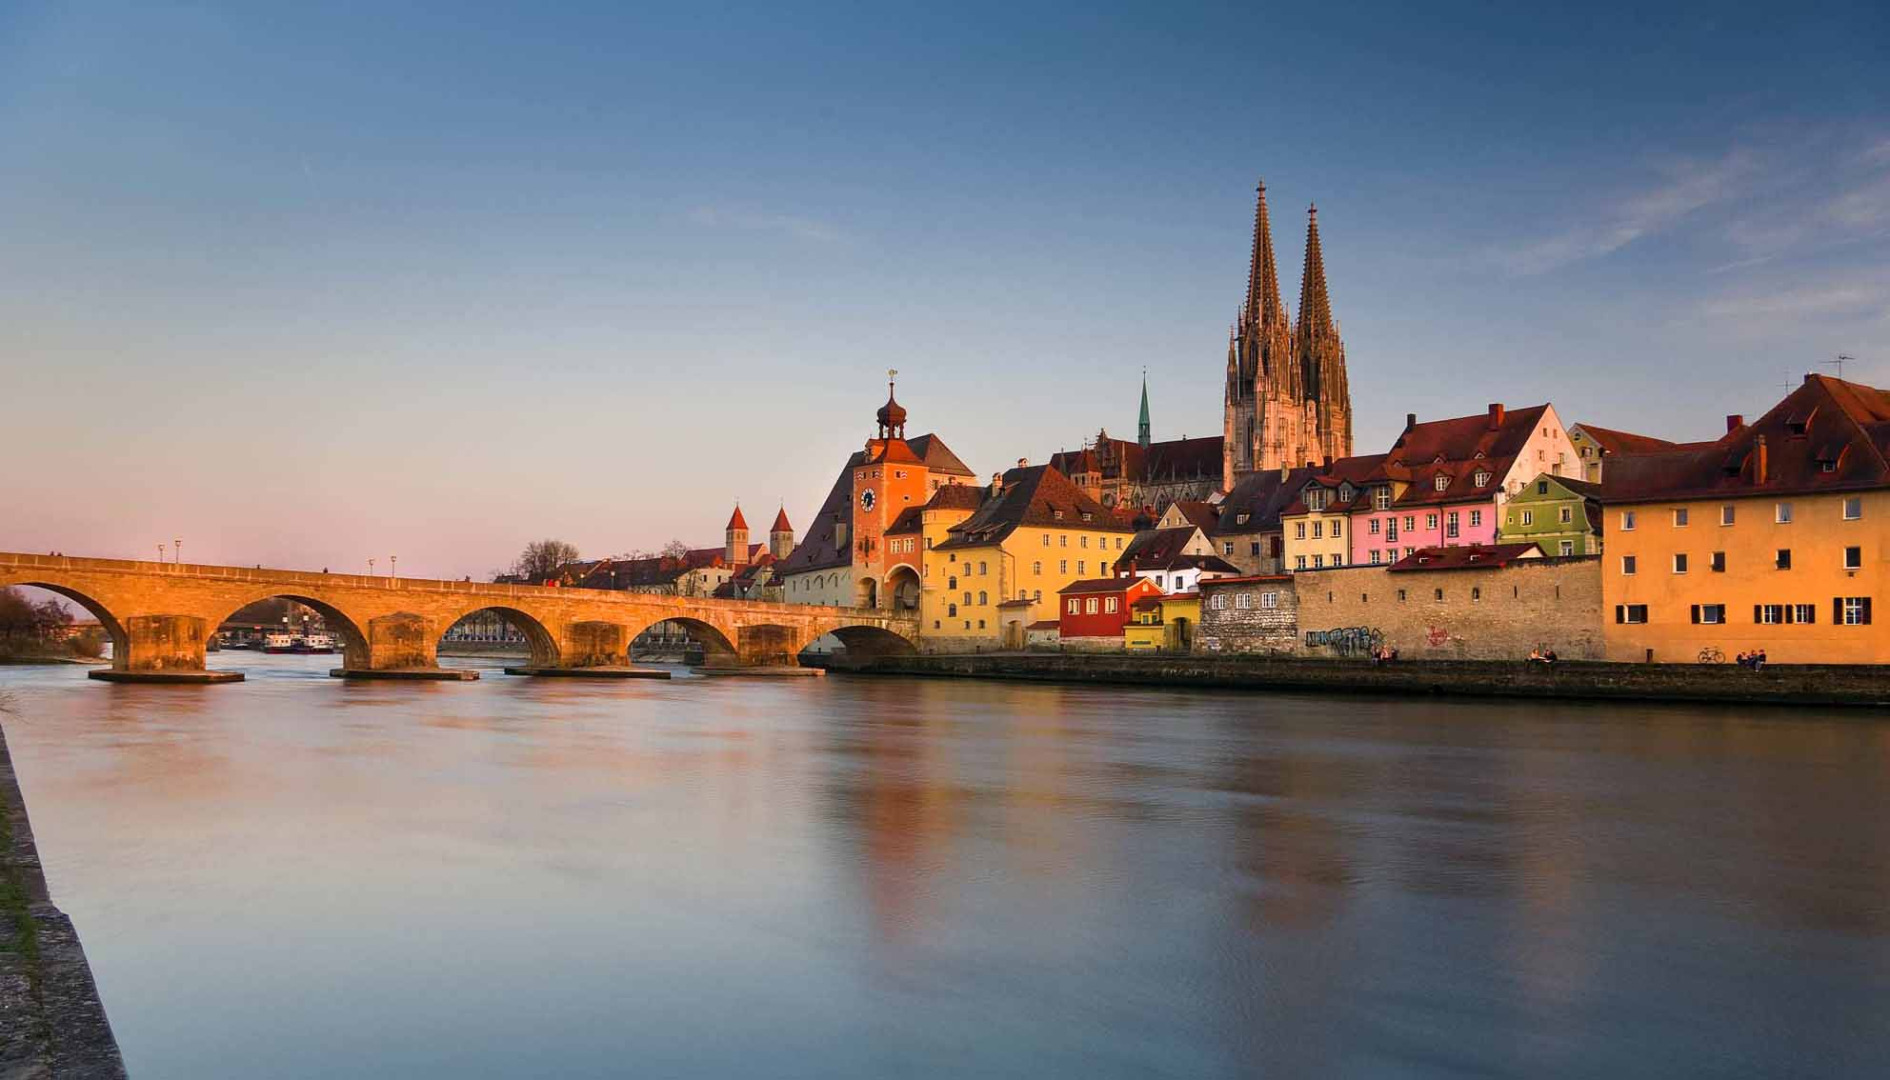 Join us on a relaxed day at the UNESCO World Heritage Site Regensburg: